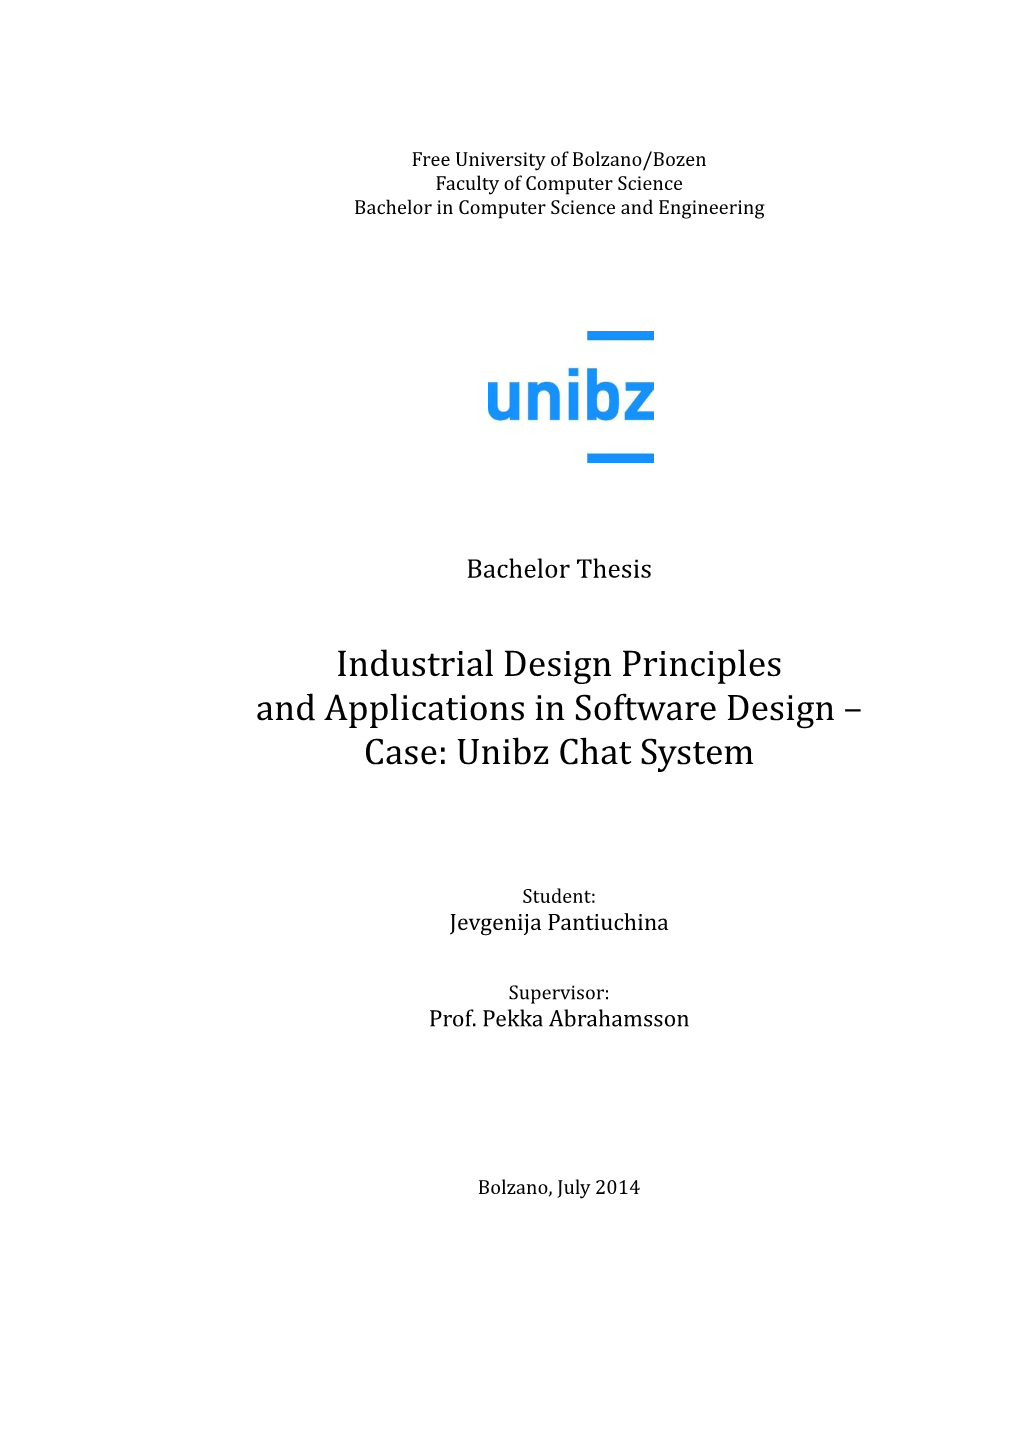 Industrial Design Principles and Applications in Software Design – Case: Unibz Chat System